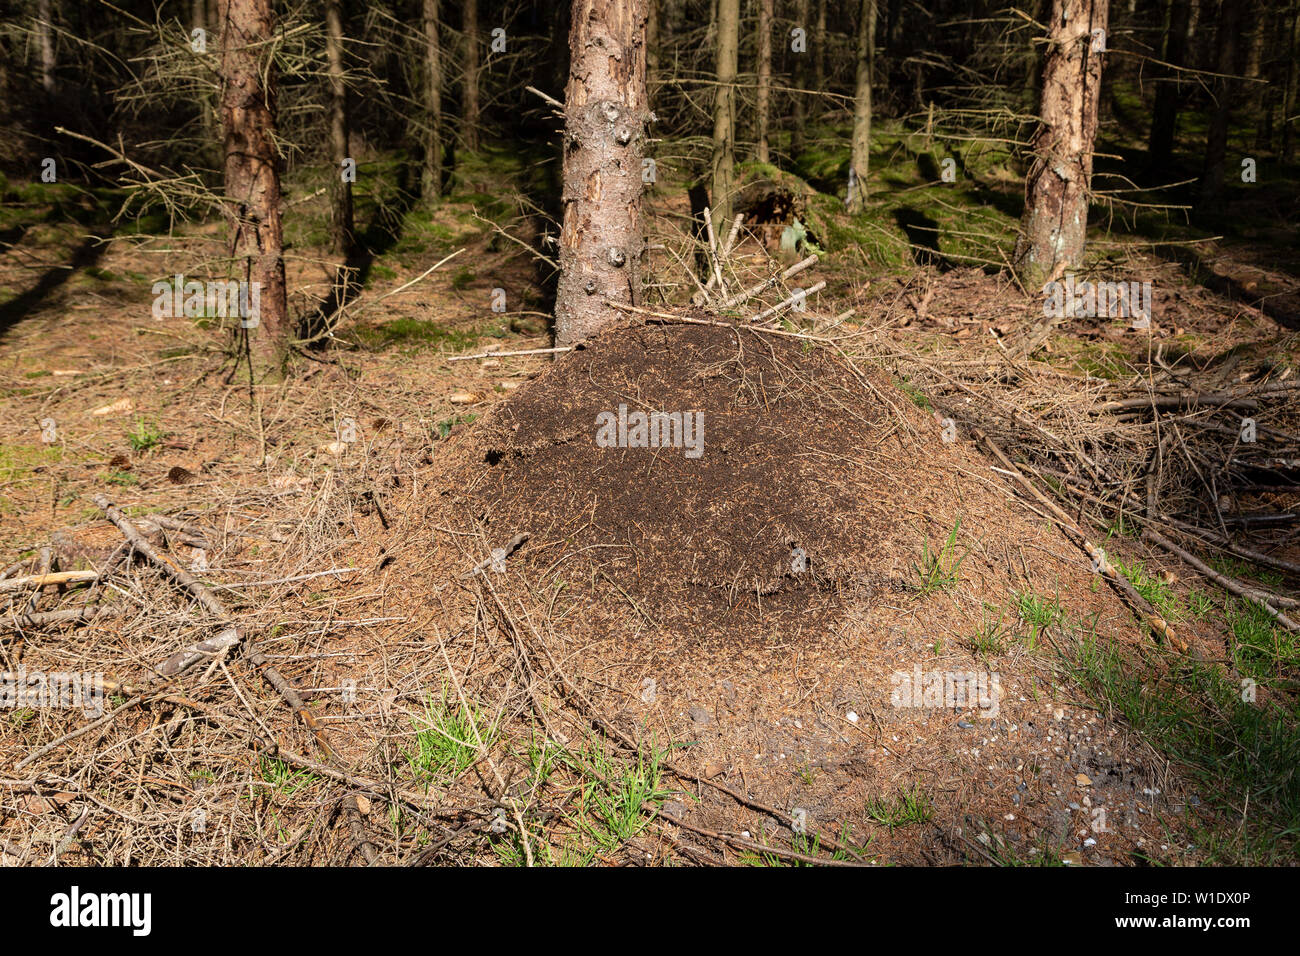 Formica polyctena nest, sun-basking red wood ants in early spring Stock Photo